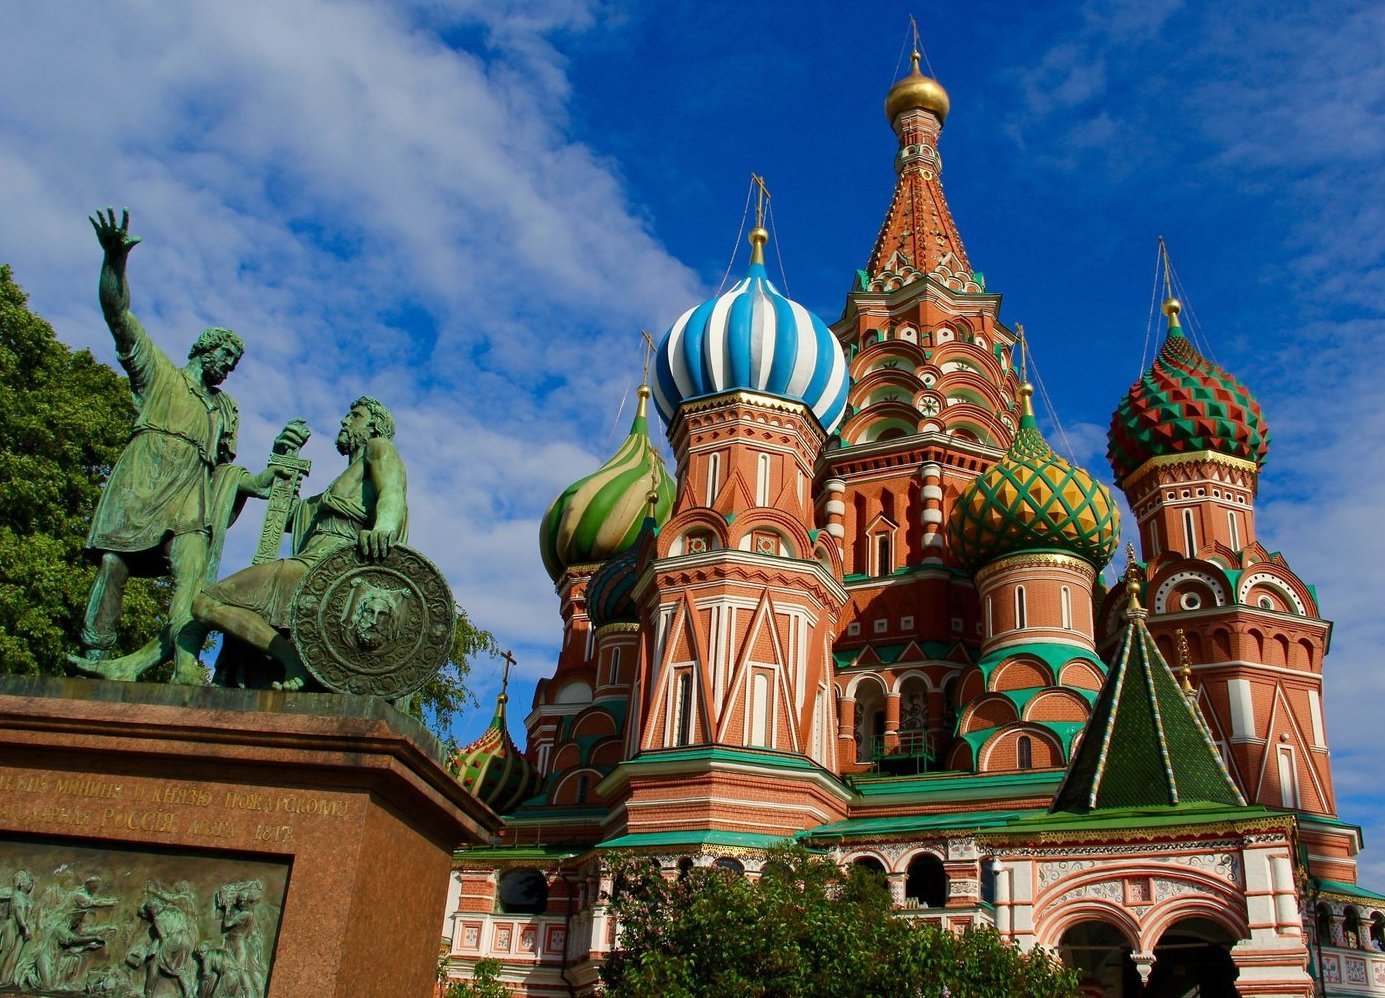 St. Basil's Cathedral, Moscow